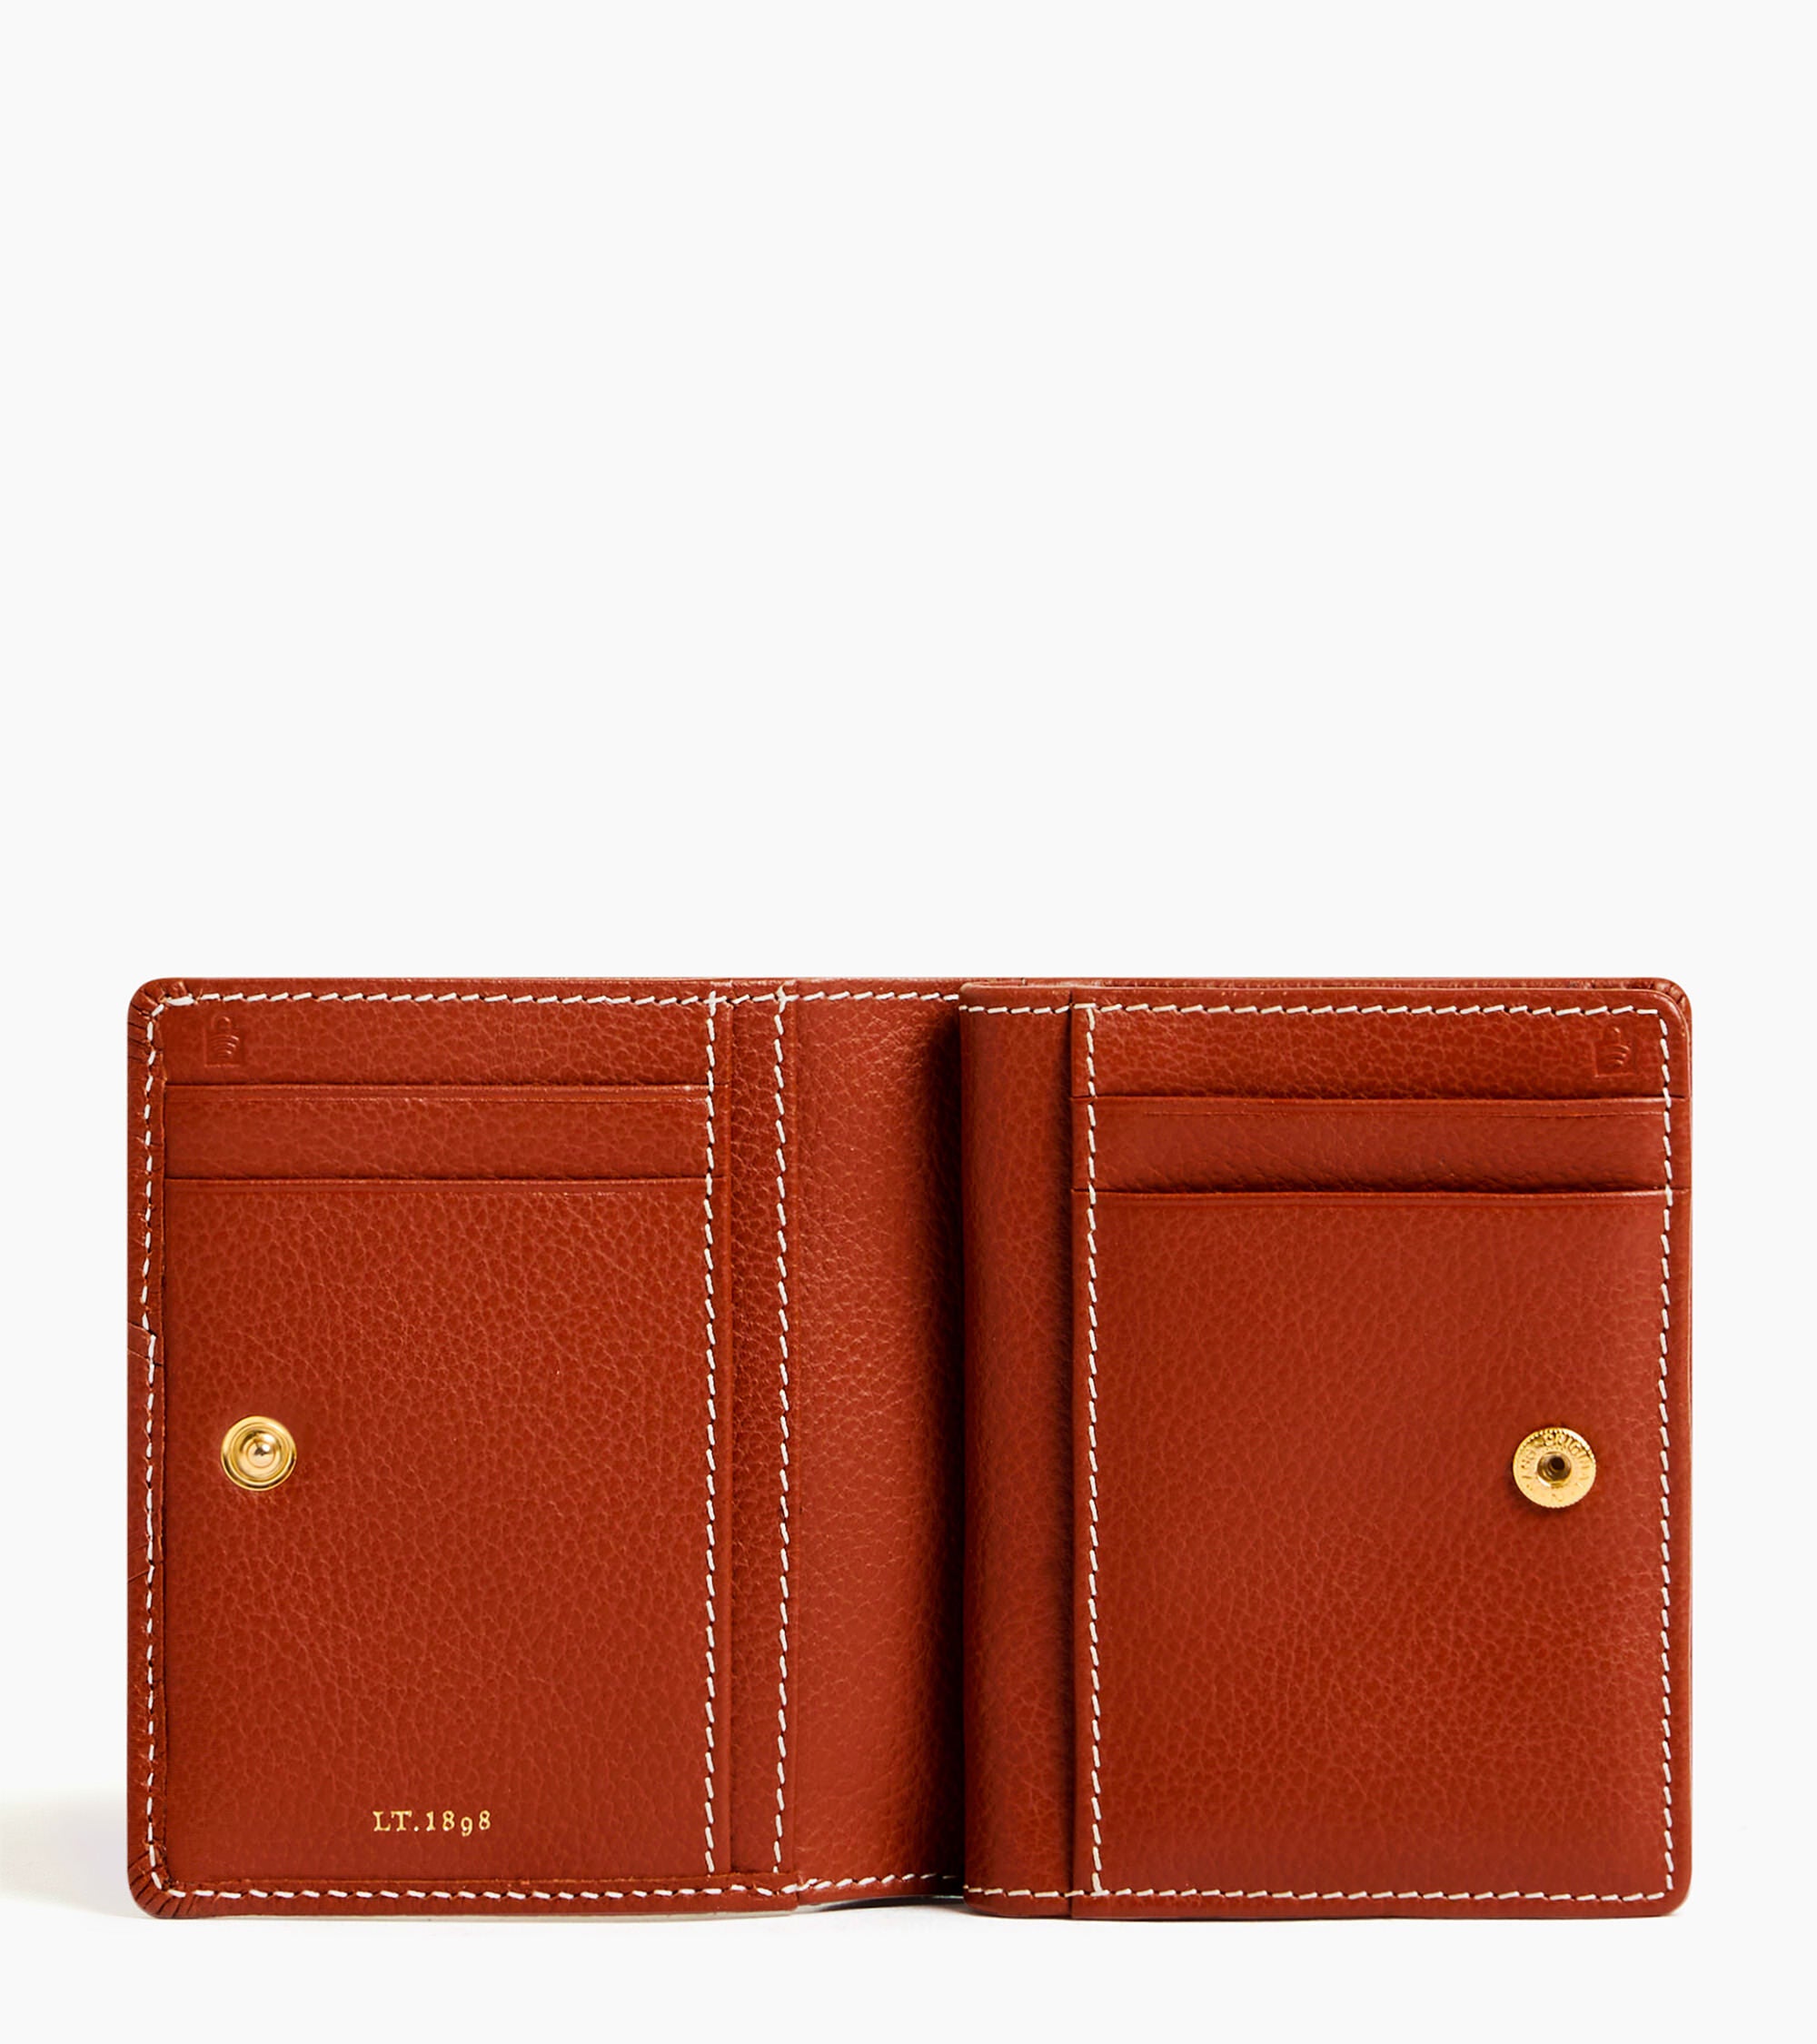 Ella small grained leather wallet